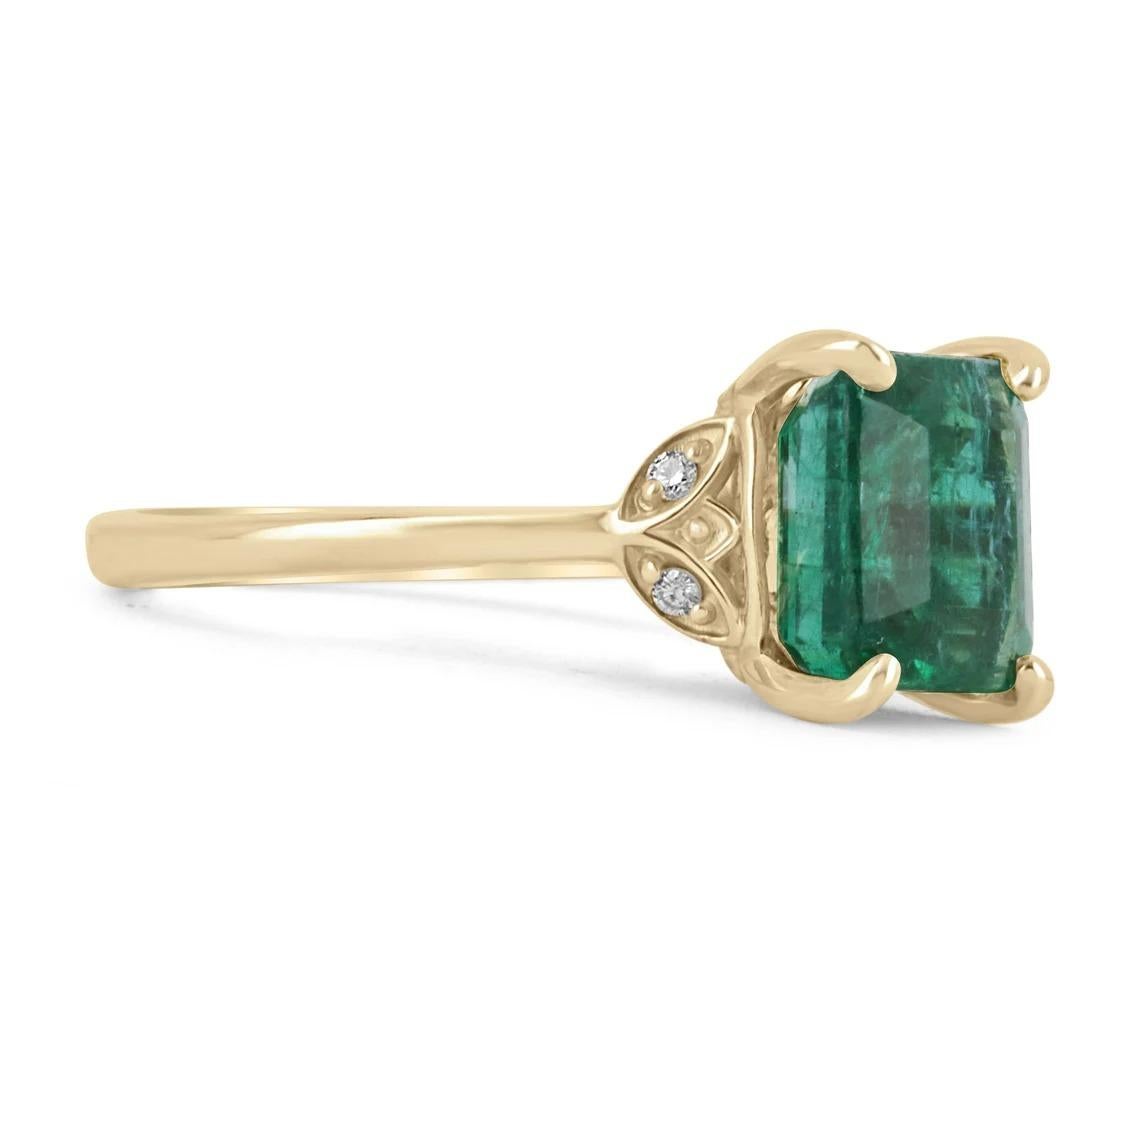 Featured is a stunning emerald and diamond ring. The center stone features a lovely, 3.48-carat natural Zambian emerald cut emerald. The gemstone has amazing characteristics, such as good eye clarity, superb luster, and a desirable dark